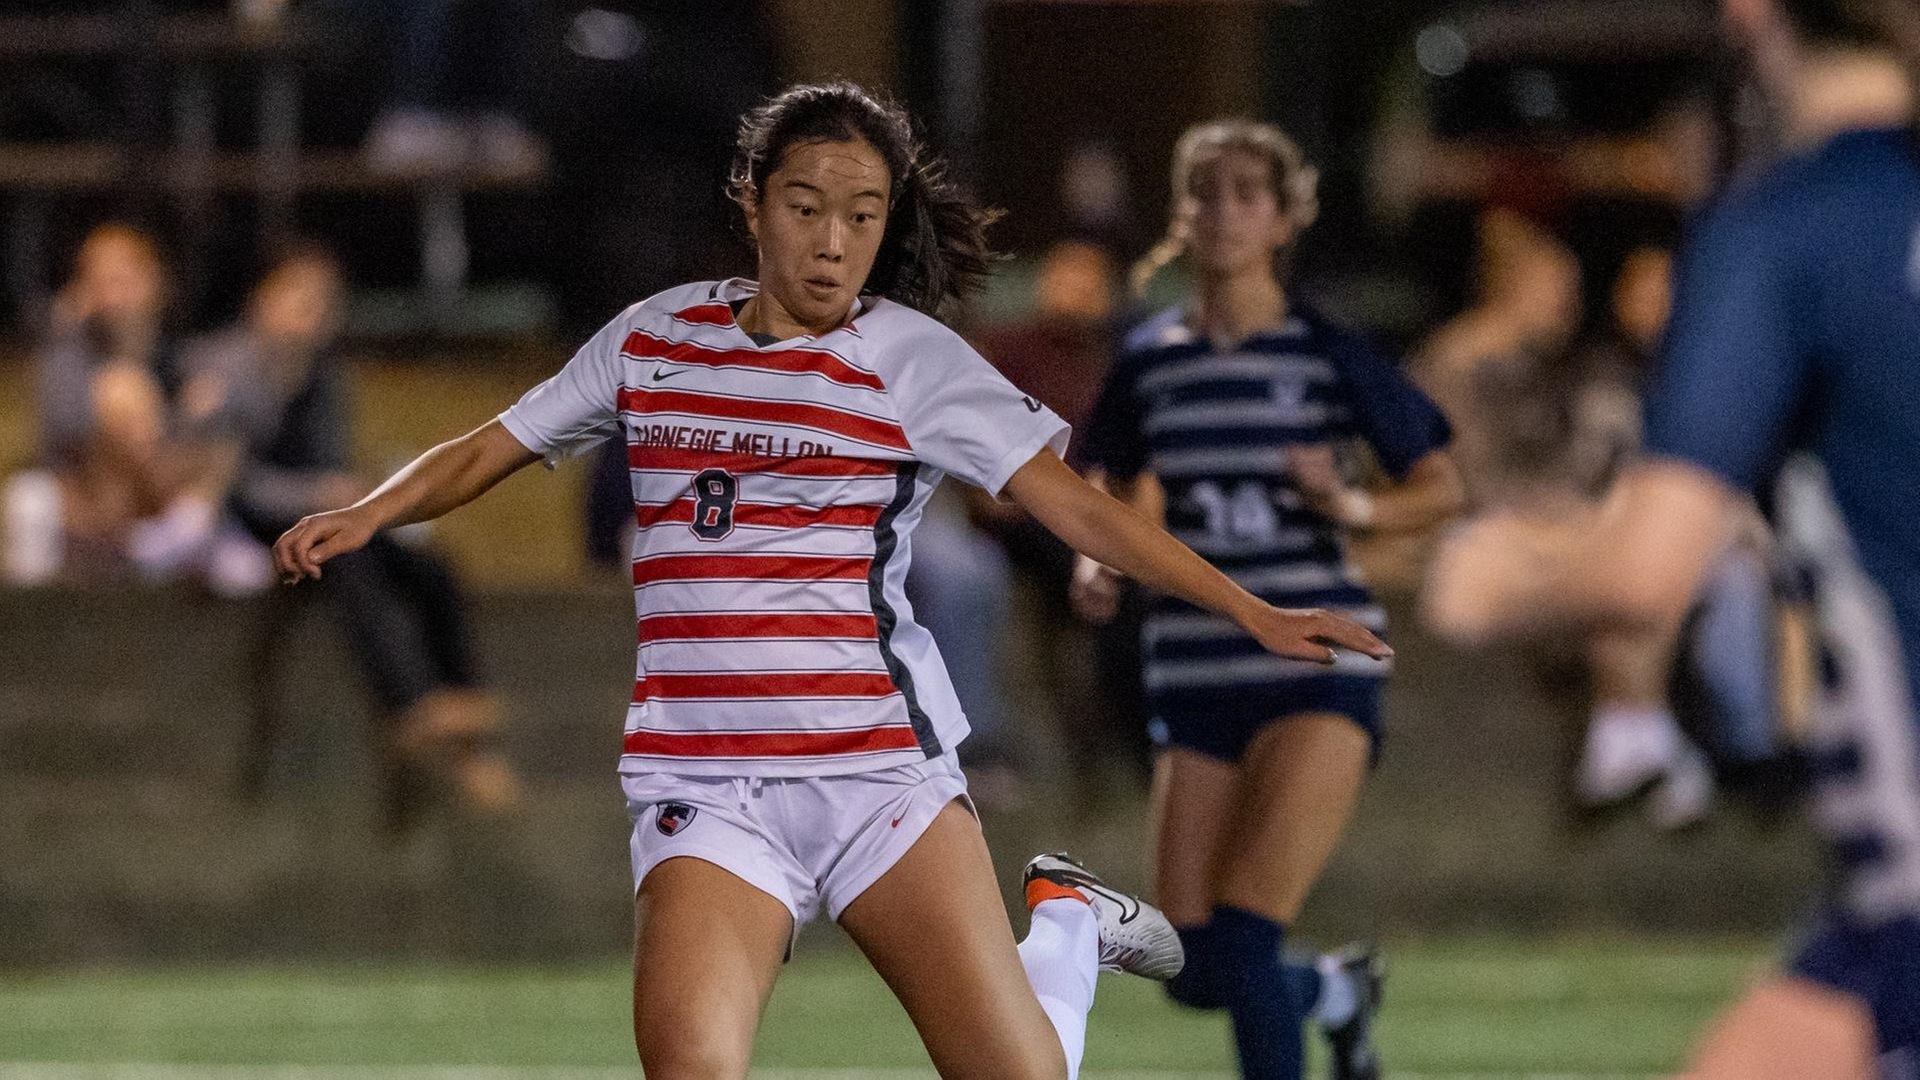 women's soccer player wearing a white and red striped jersey looks down while preparing to kick a ball